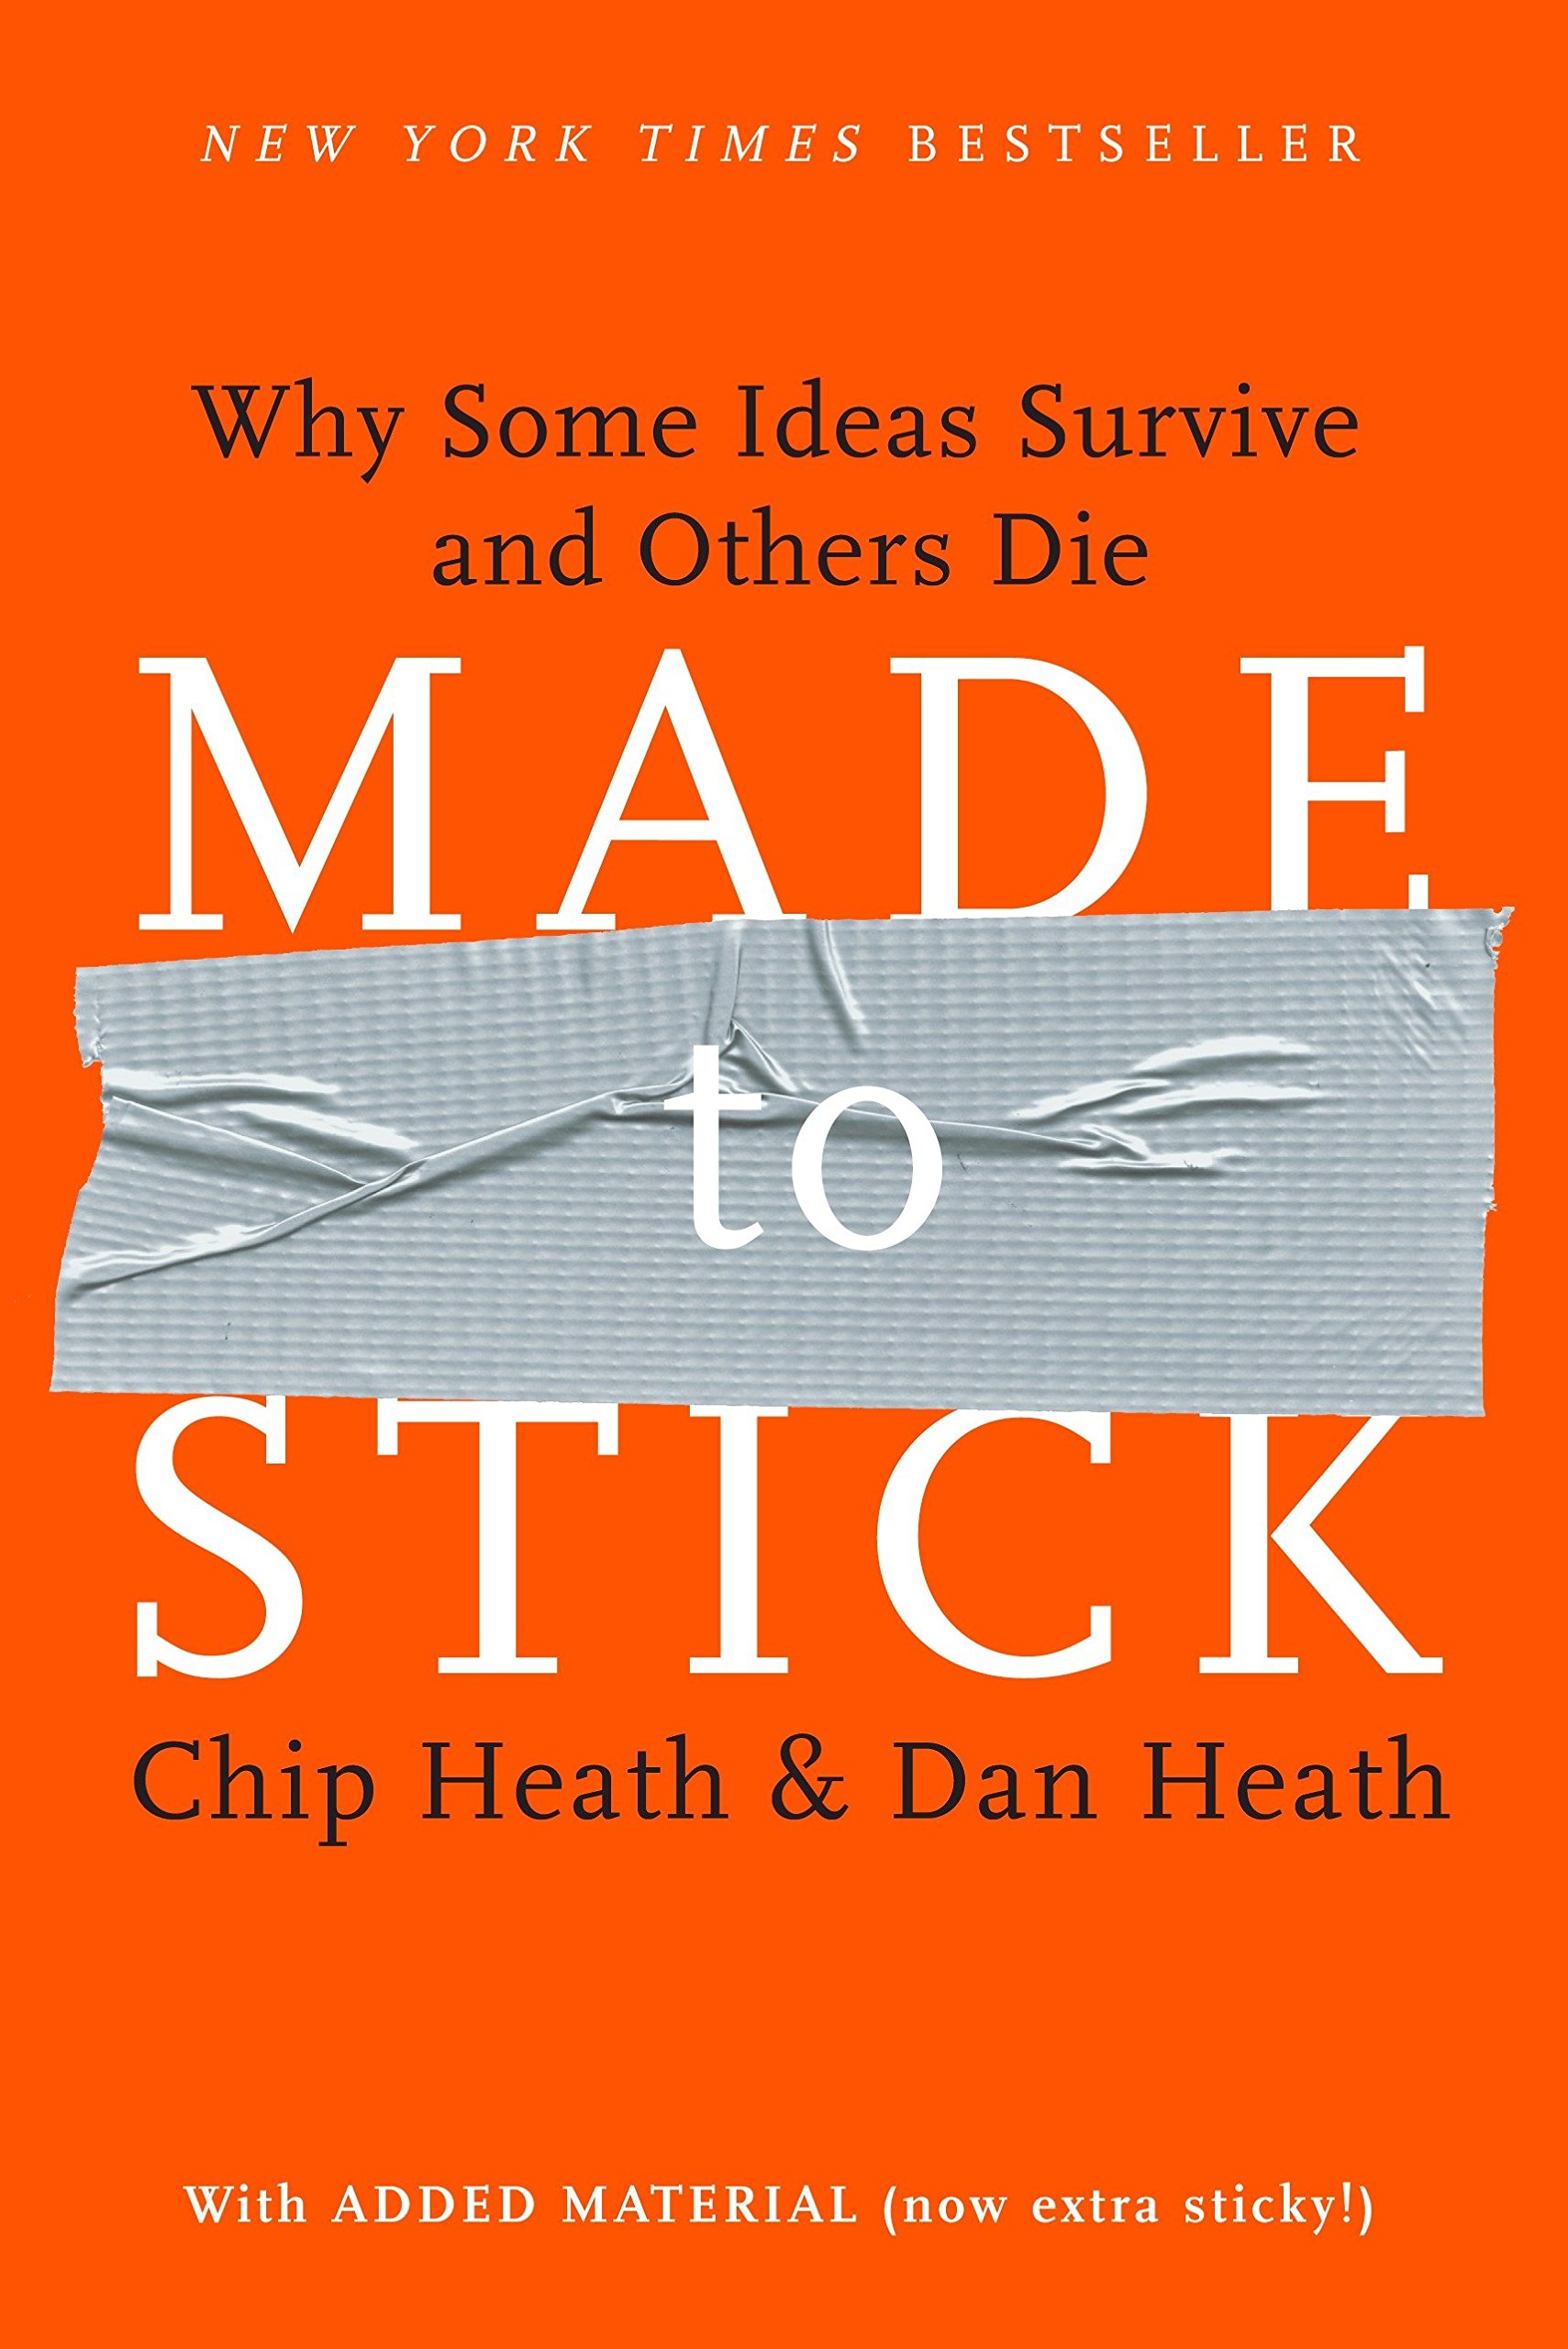 Made To Stick – Why Some Ideas Survive and Others Die Summary